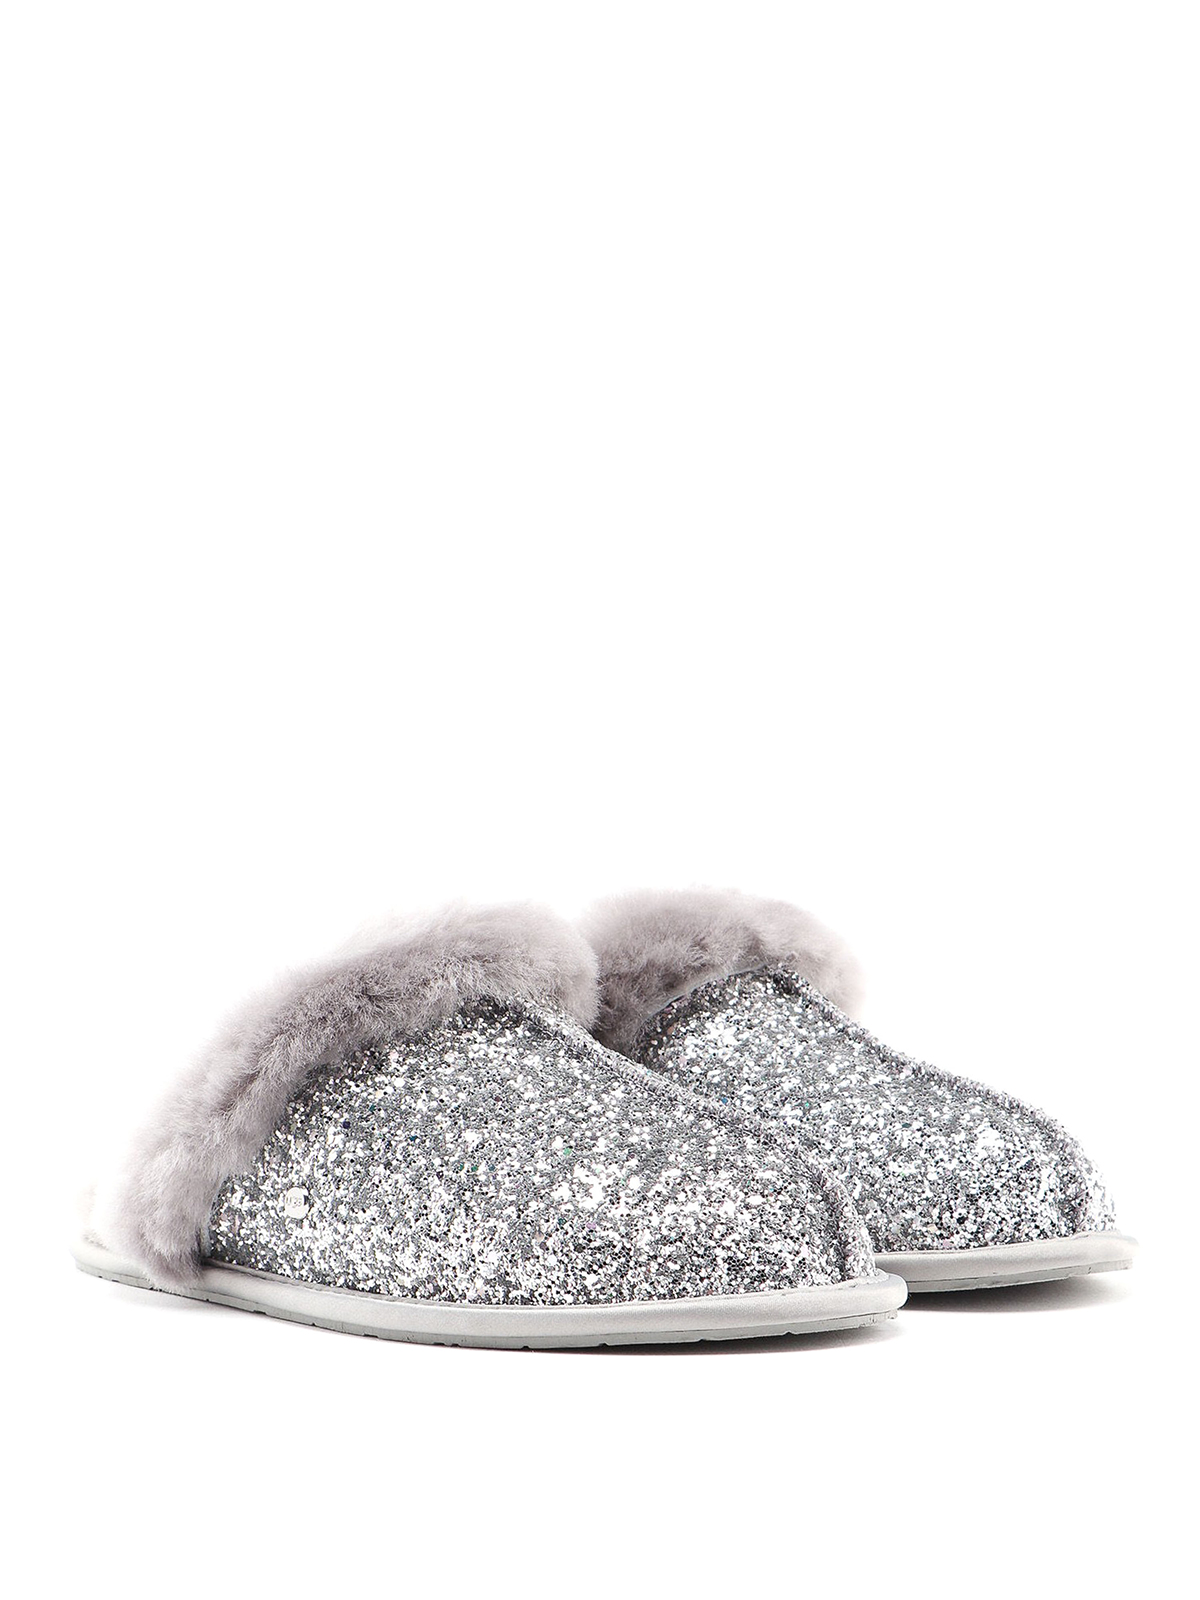 Mules shoes Ugg - Scuffette II Cosmos slippers - 1107074SILVER 